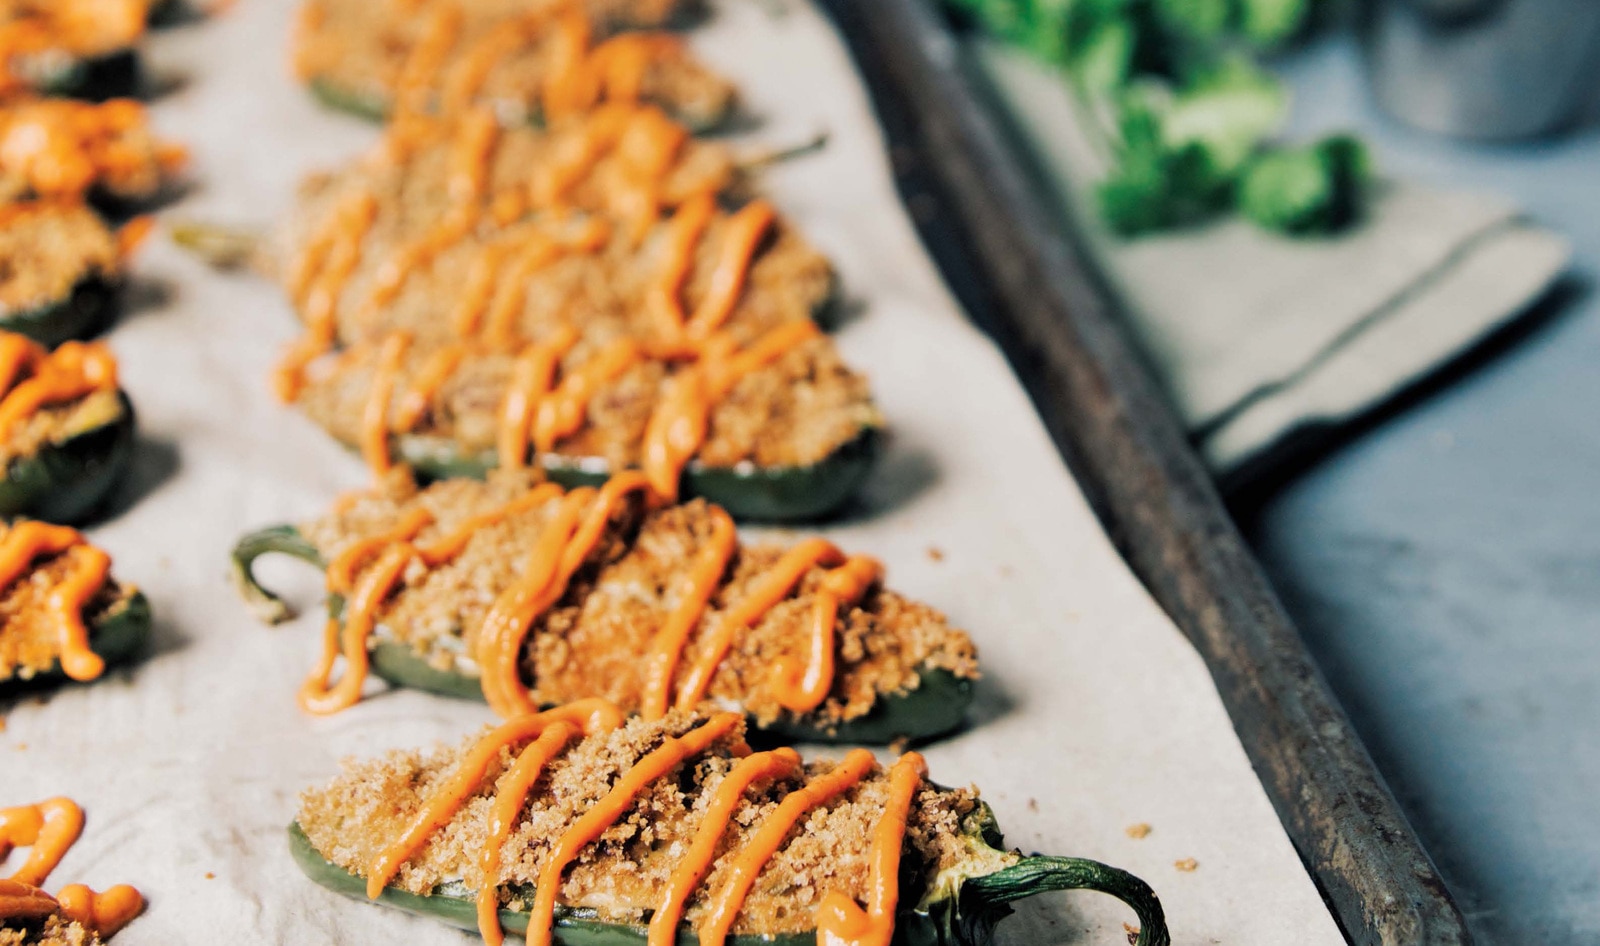 7 Delicious, Healthy Vegan Recipes to Help You Build the Ultimate Big Game Day Buffet Spread